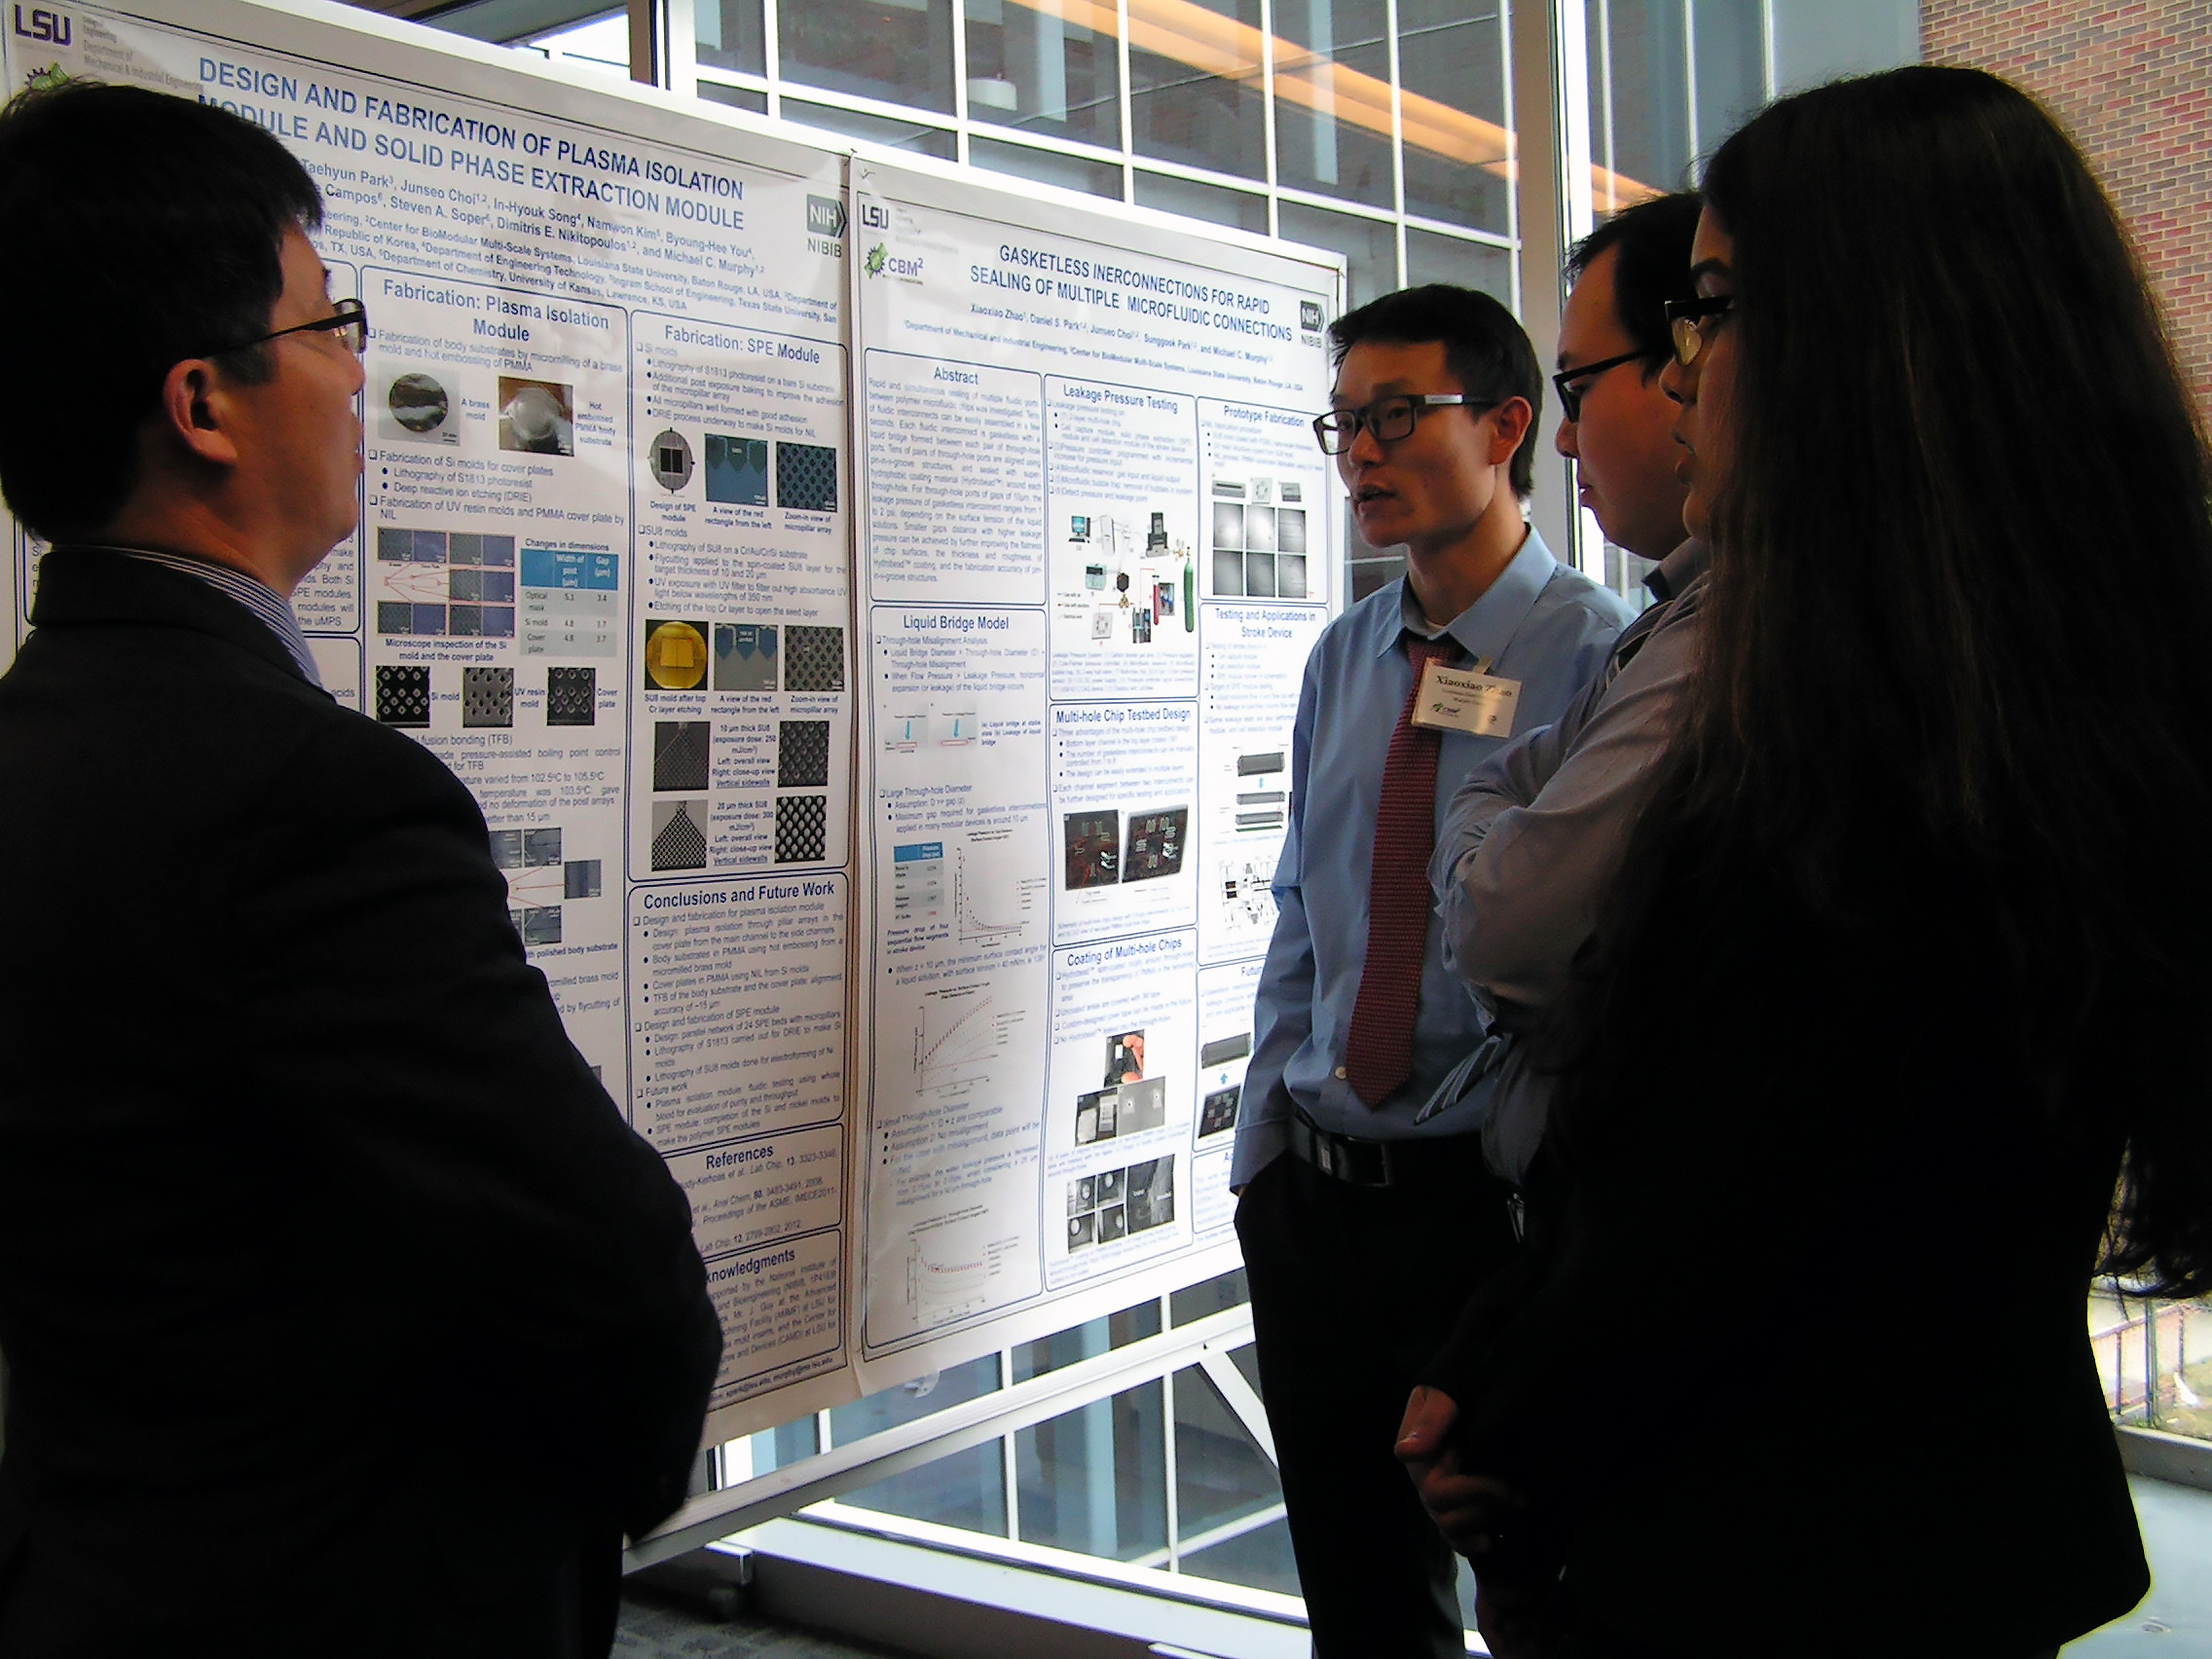 One individual elaborating on a research poster to an audience of three attentive listeners.